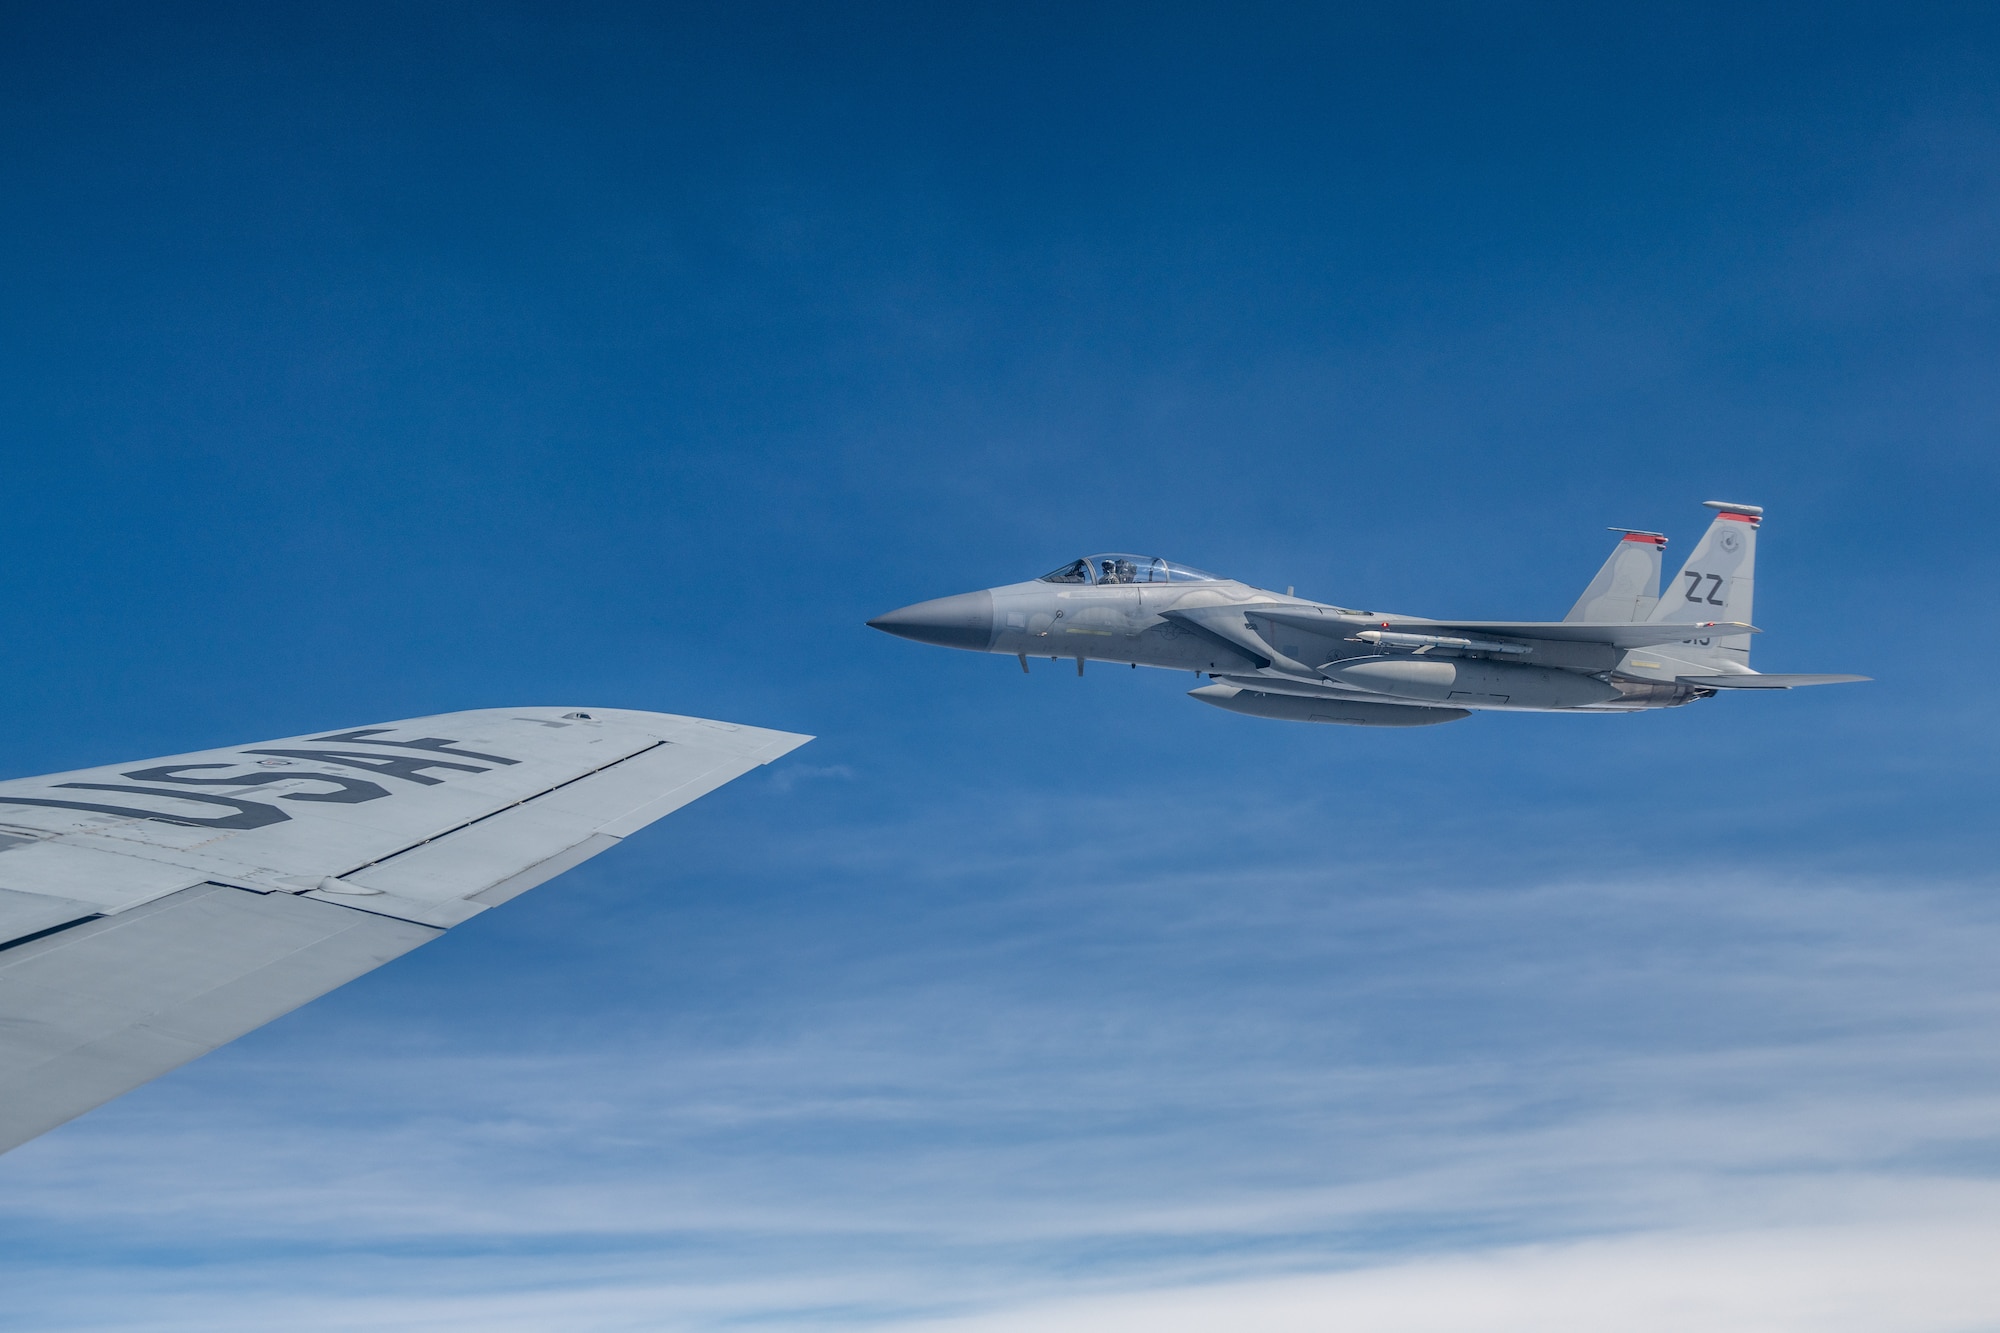 A fighter jet flies right next to the wing of KC-135 Stratotanker